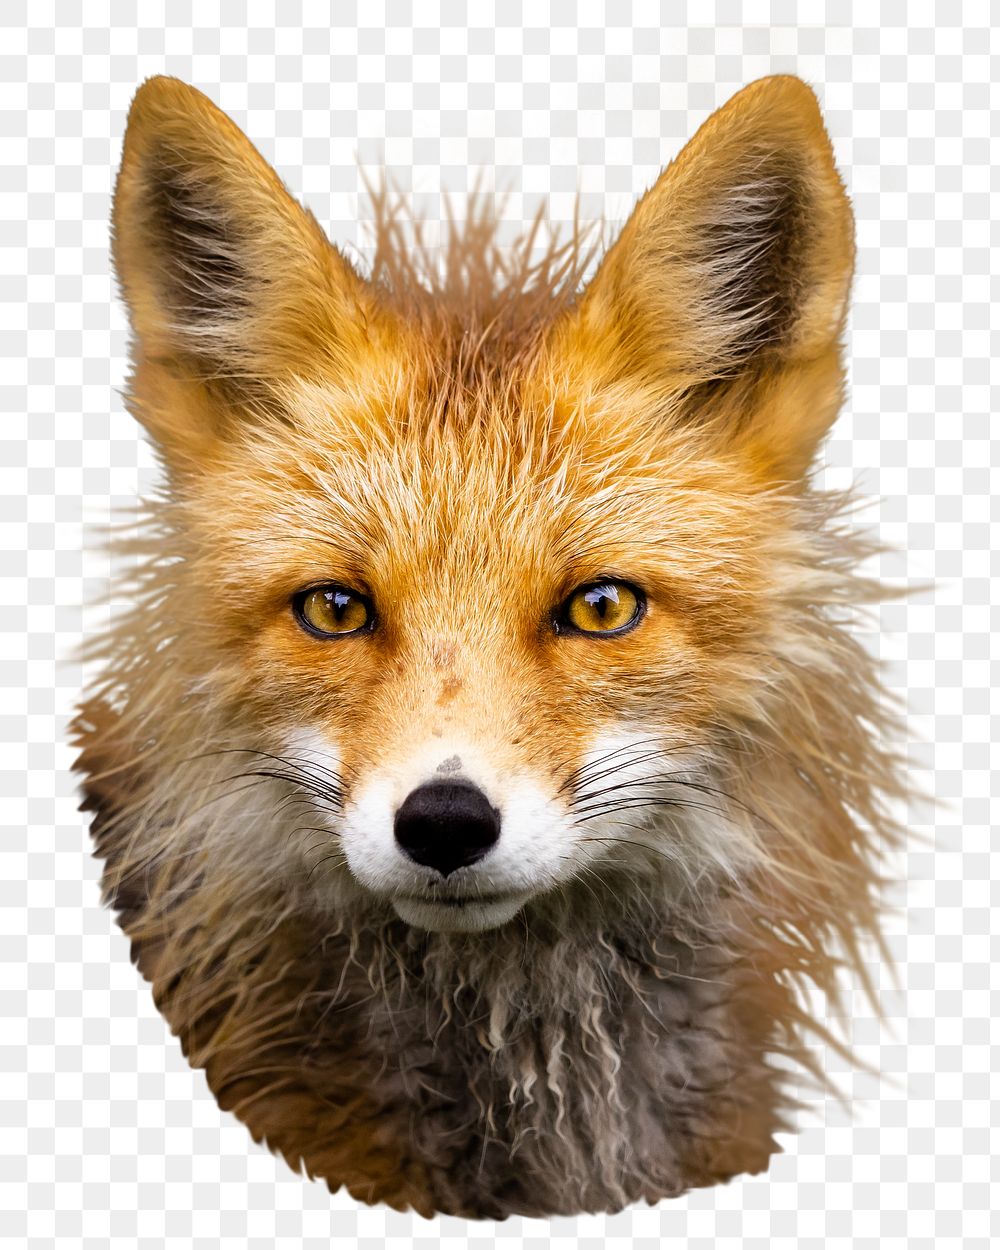 Red fox png sticker, animal image, transparent background